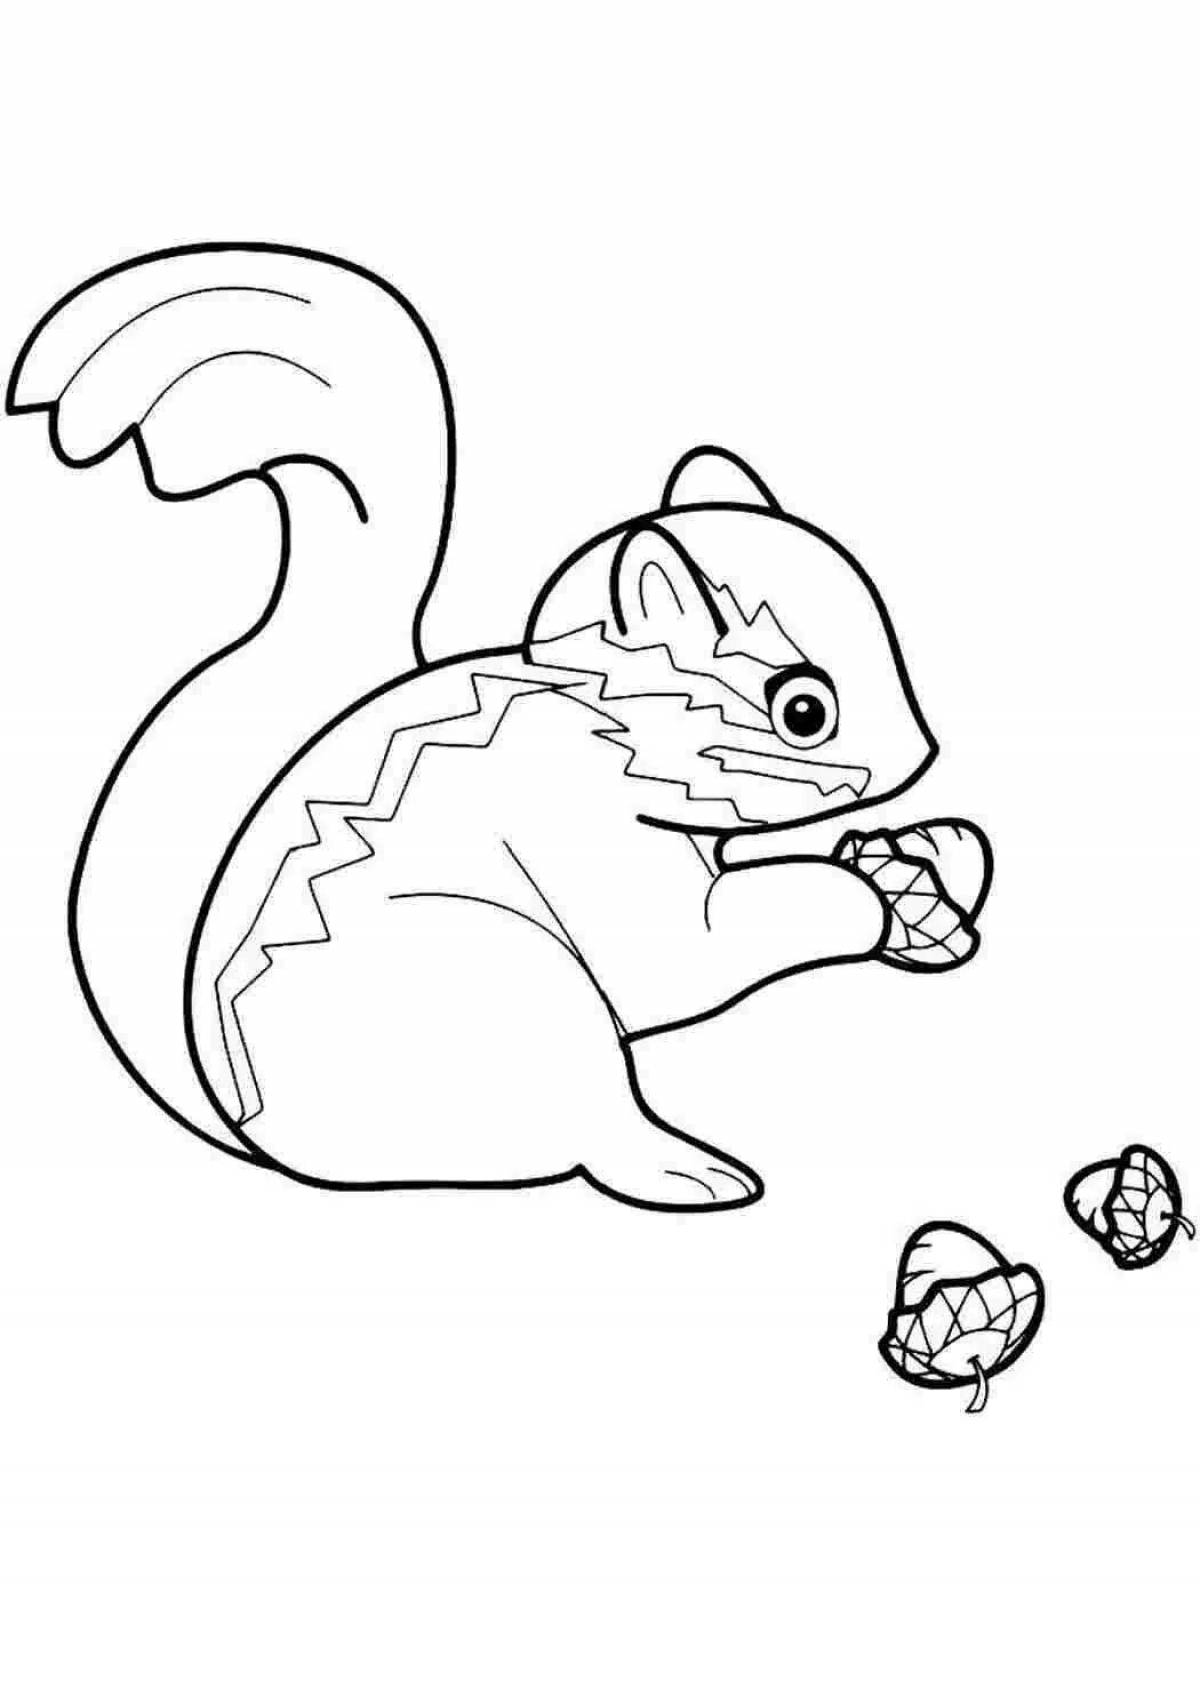 Amazing chipmunk coloring book for kids